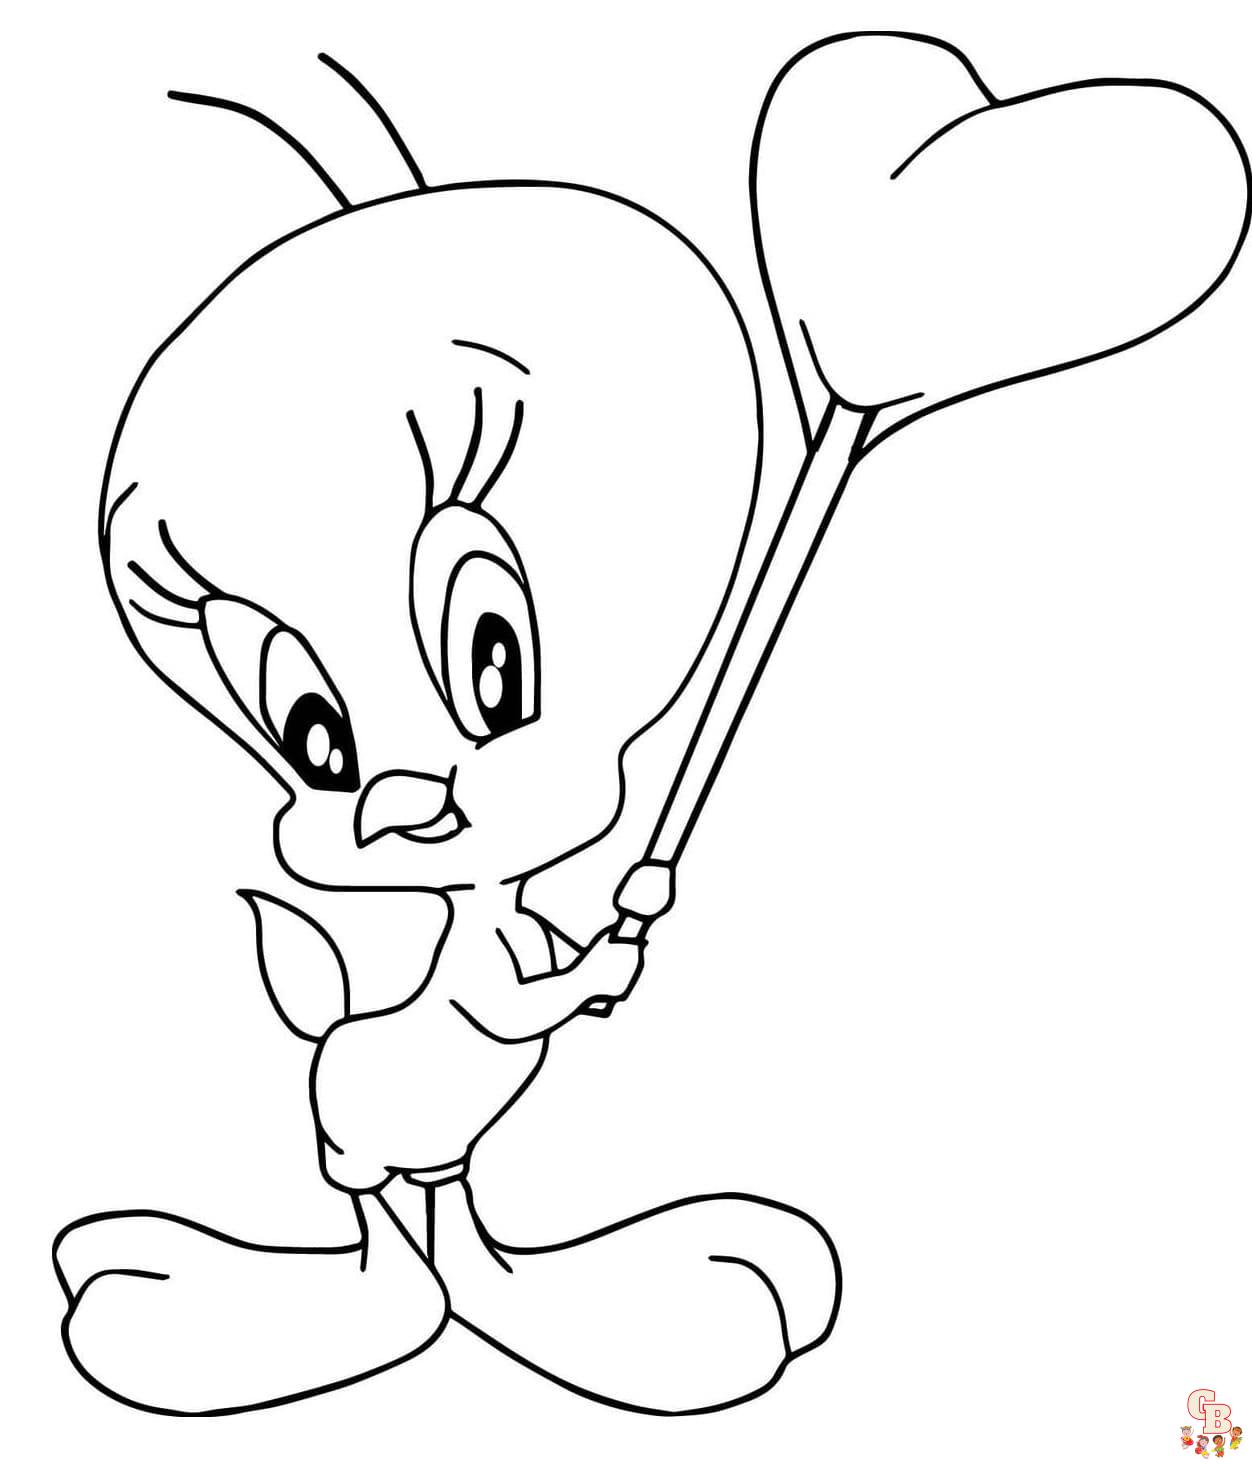 Printable tweety coloring pages free for kids and adults